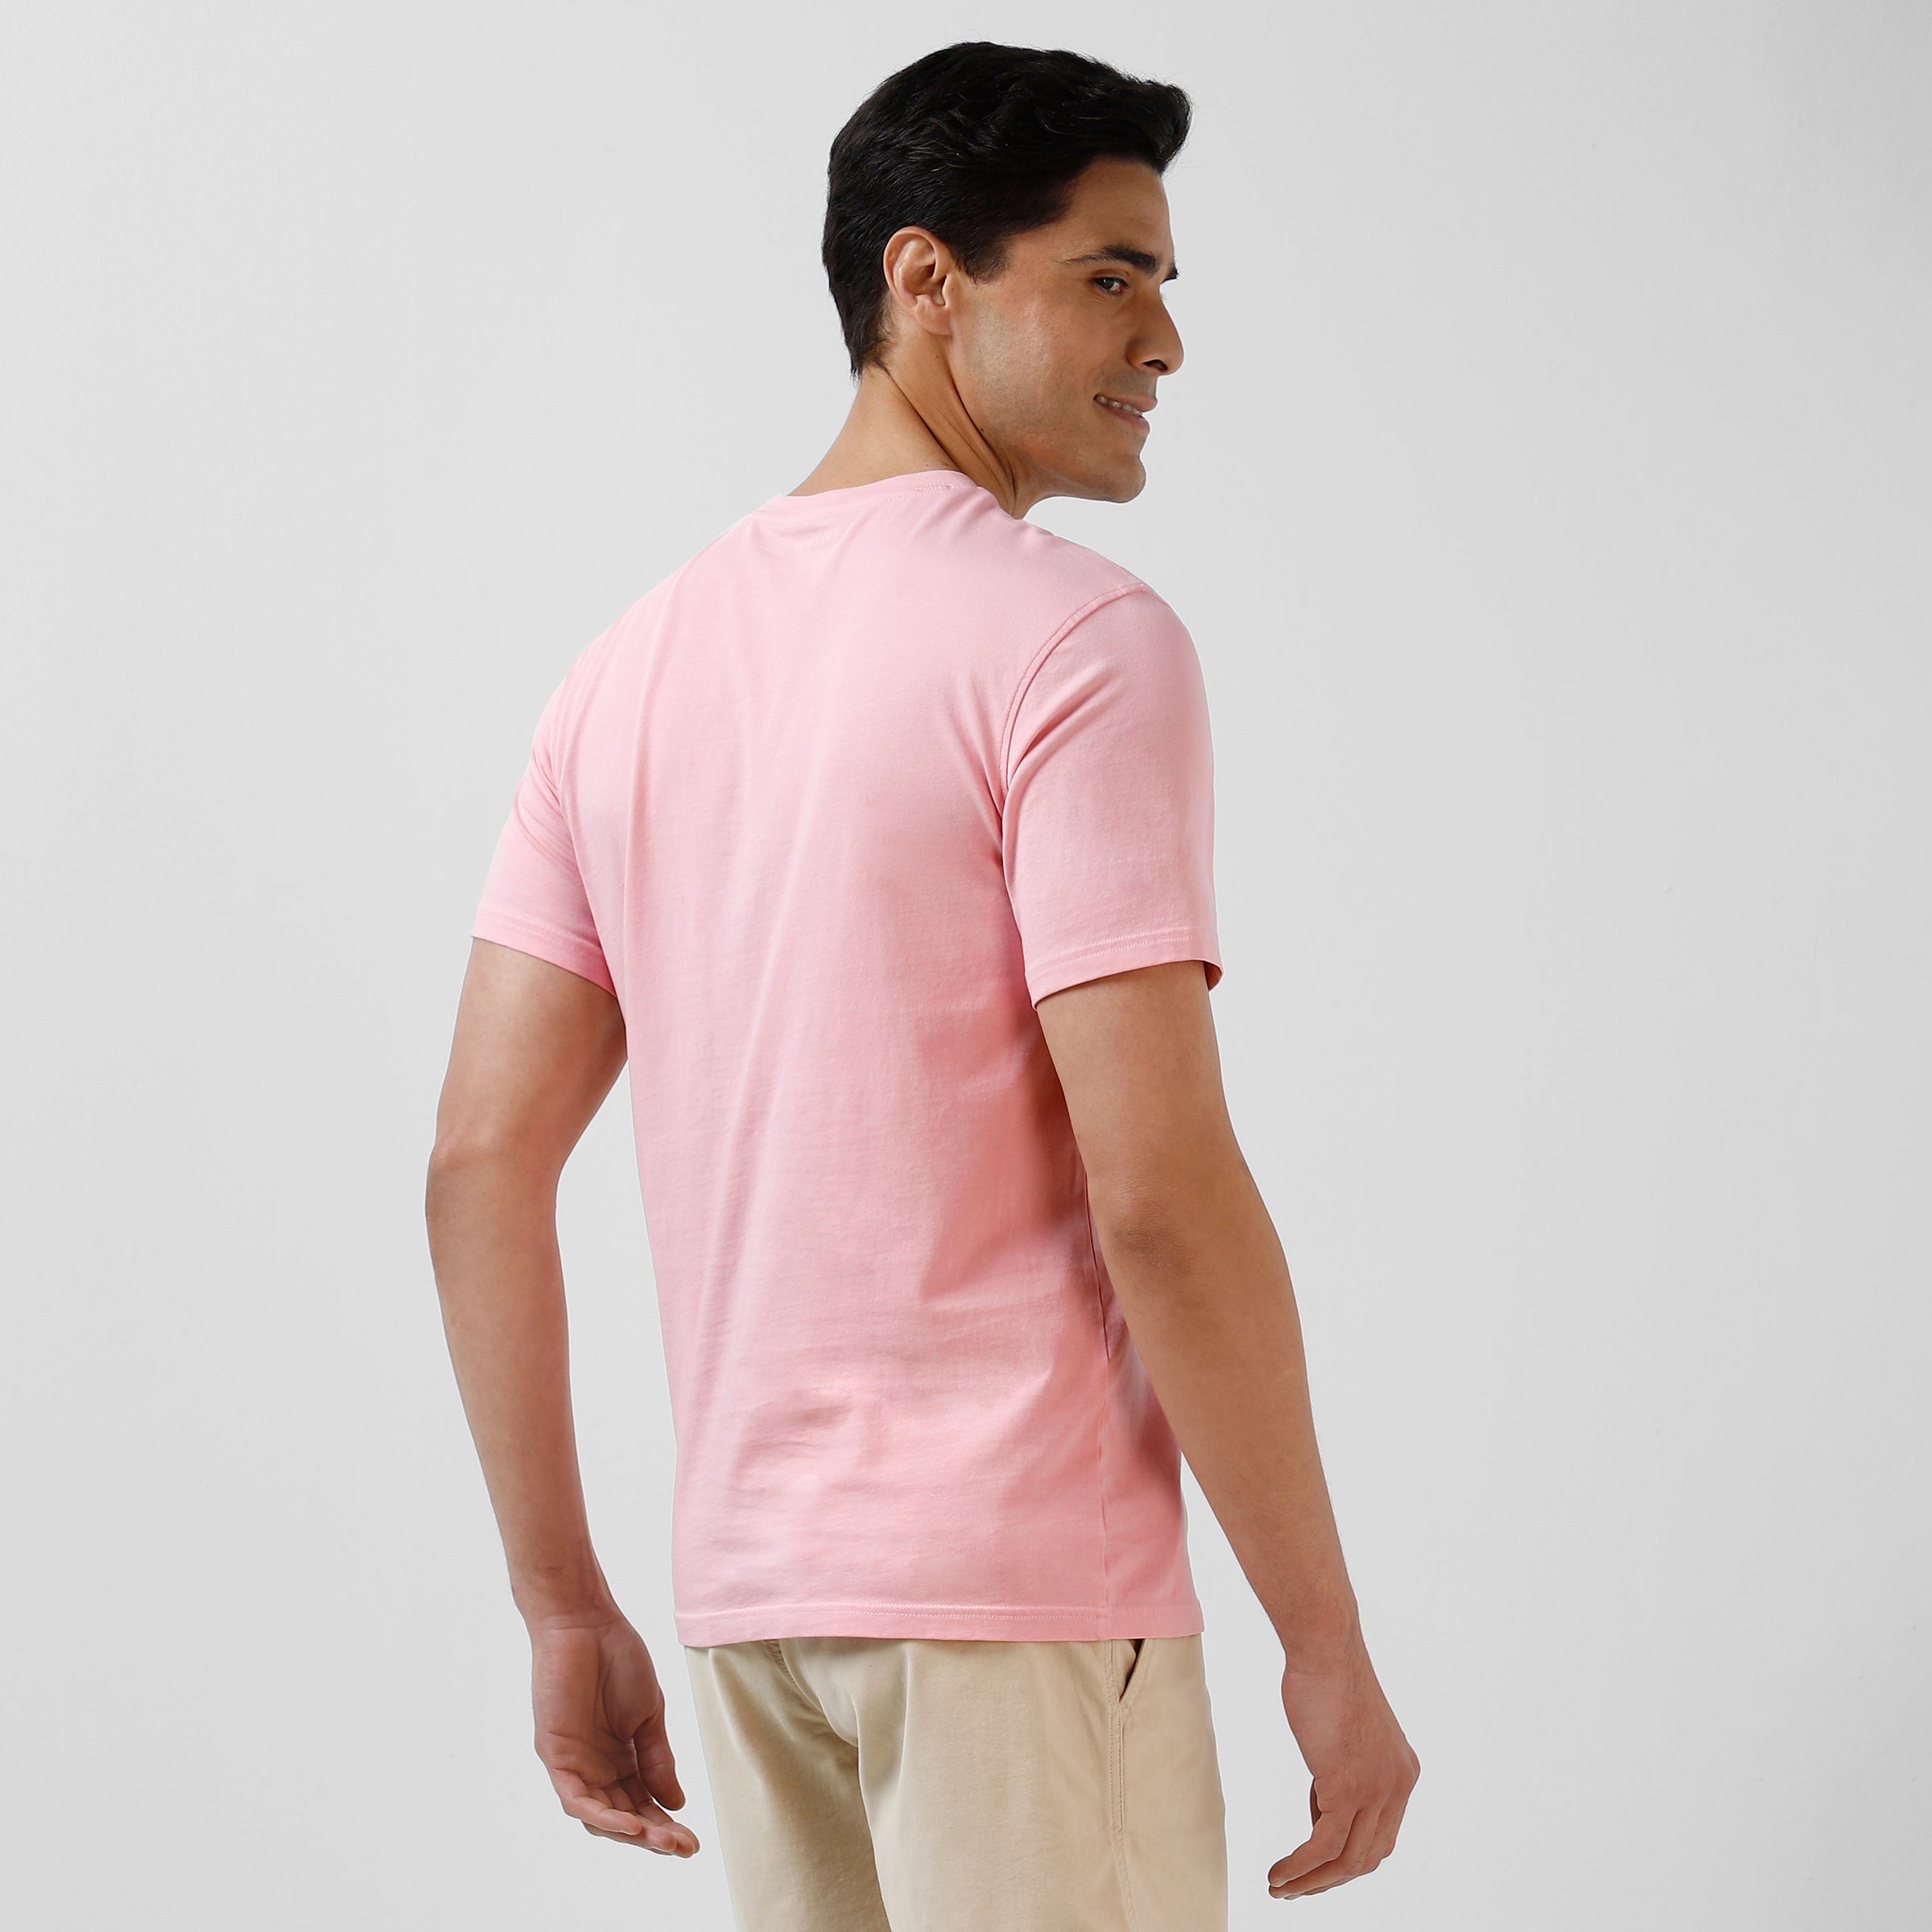 Natural Dye Tee Pink back right on model